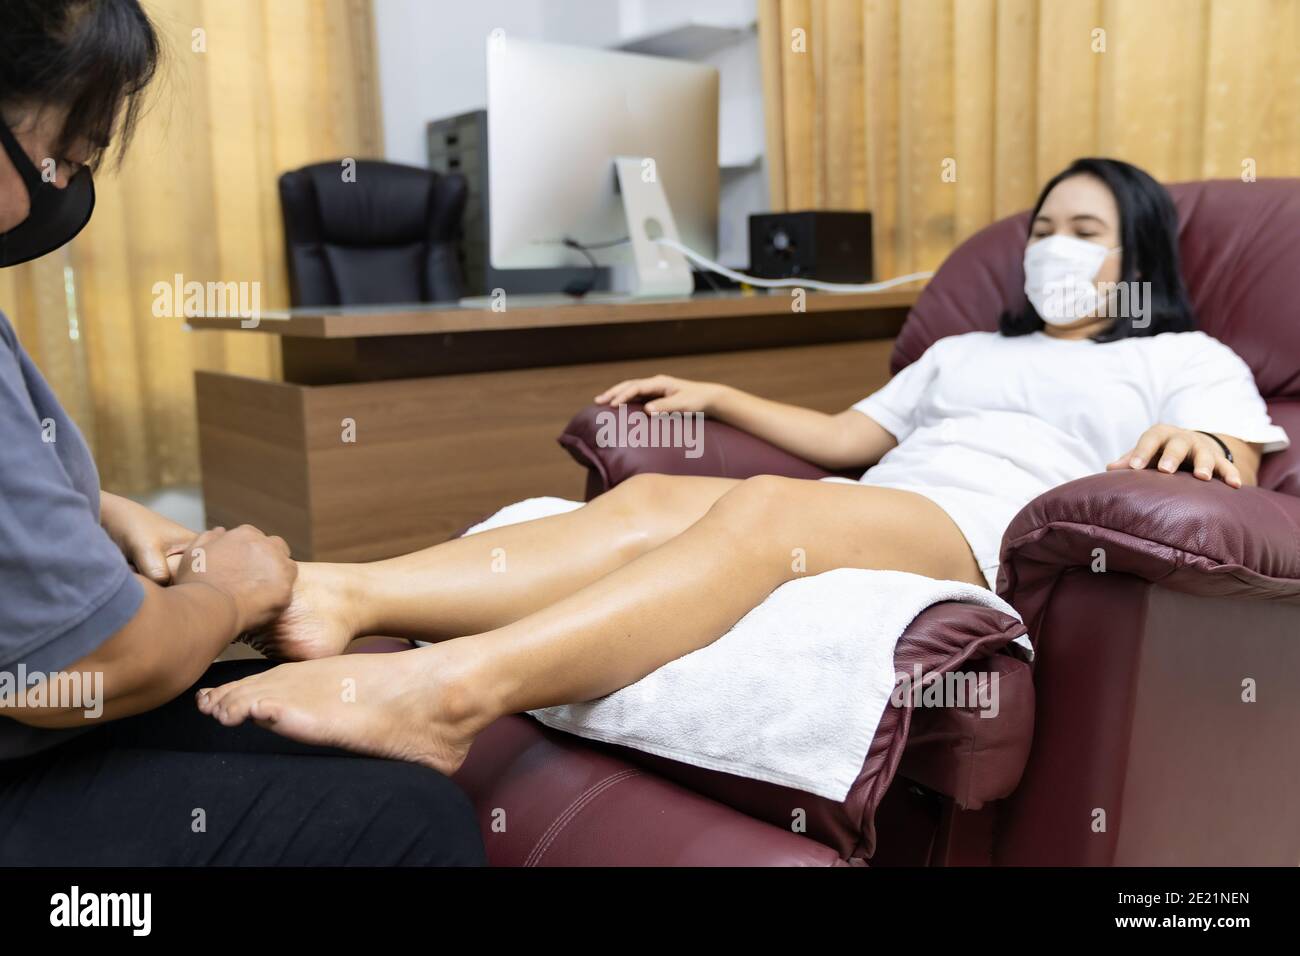 Quarantine asian woman do foot massage at home with face mask while city lockdown for social distance due to coronavirus pandemic. Massage is one of s Stock Photo